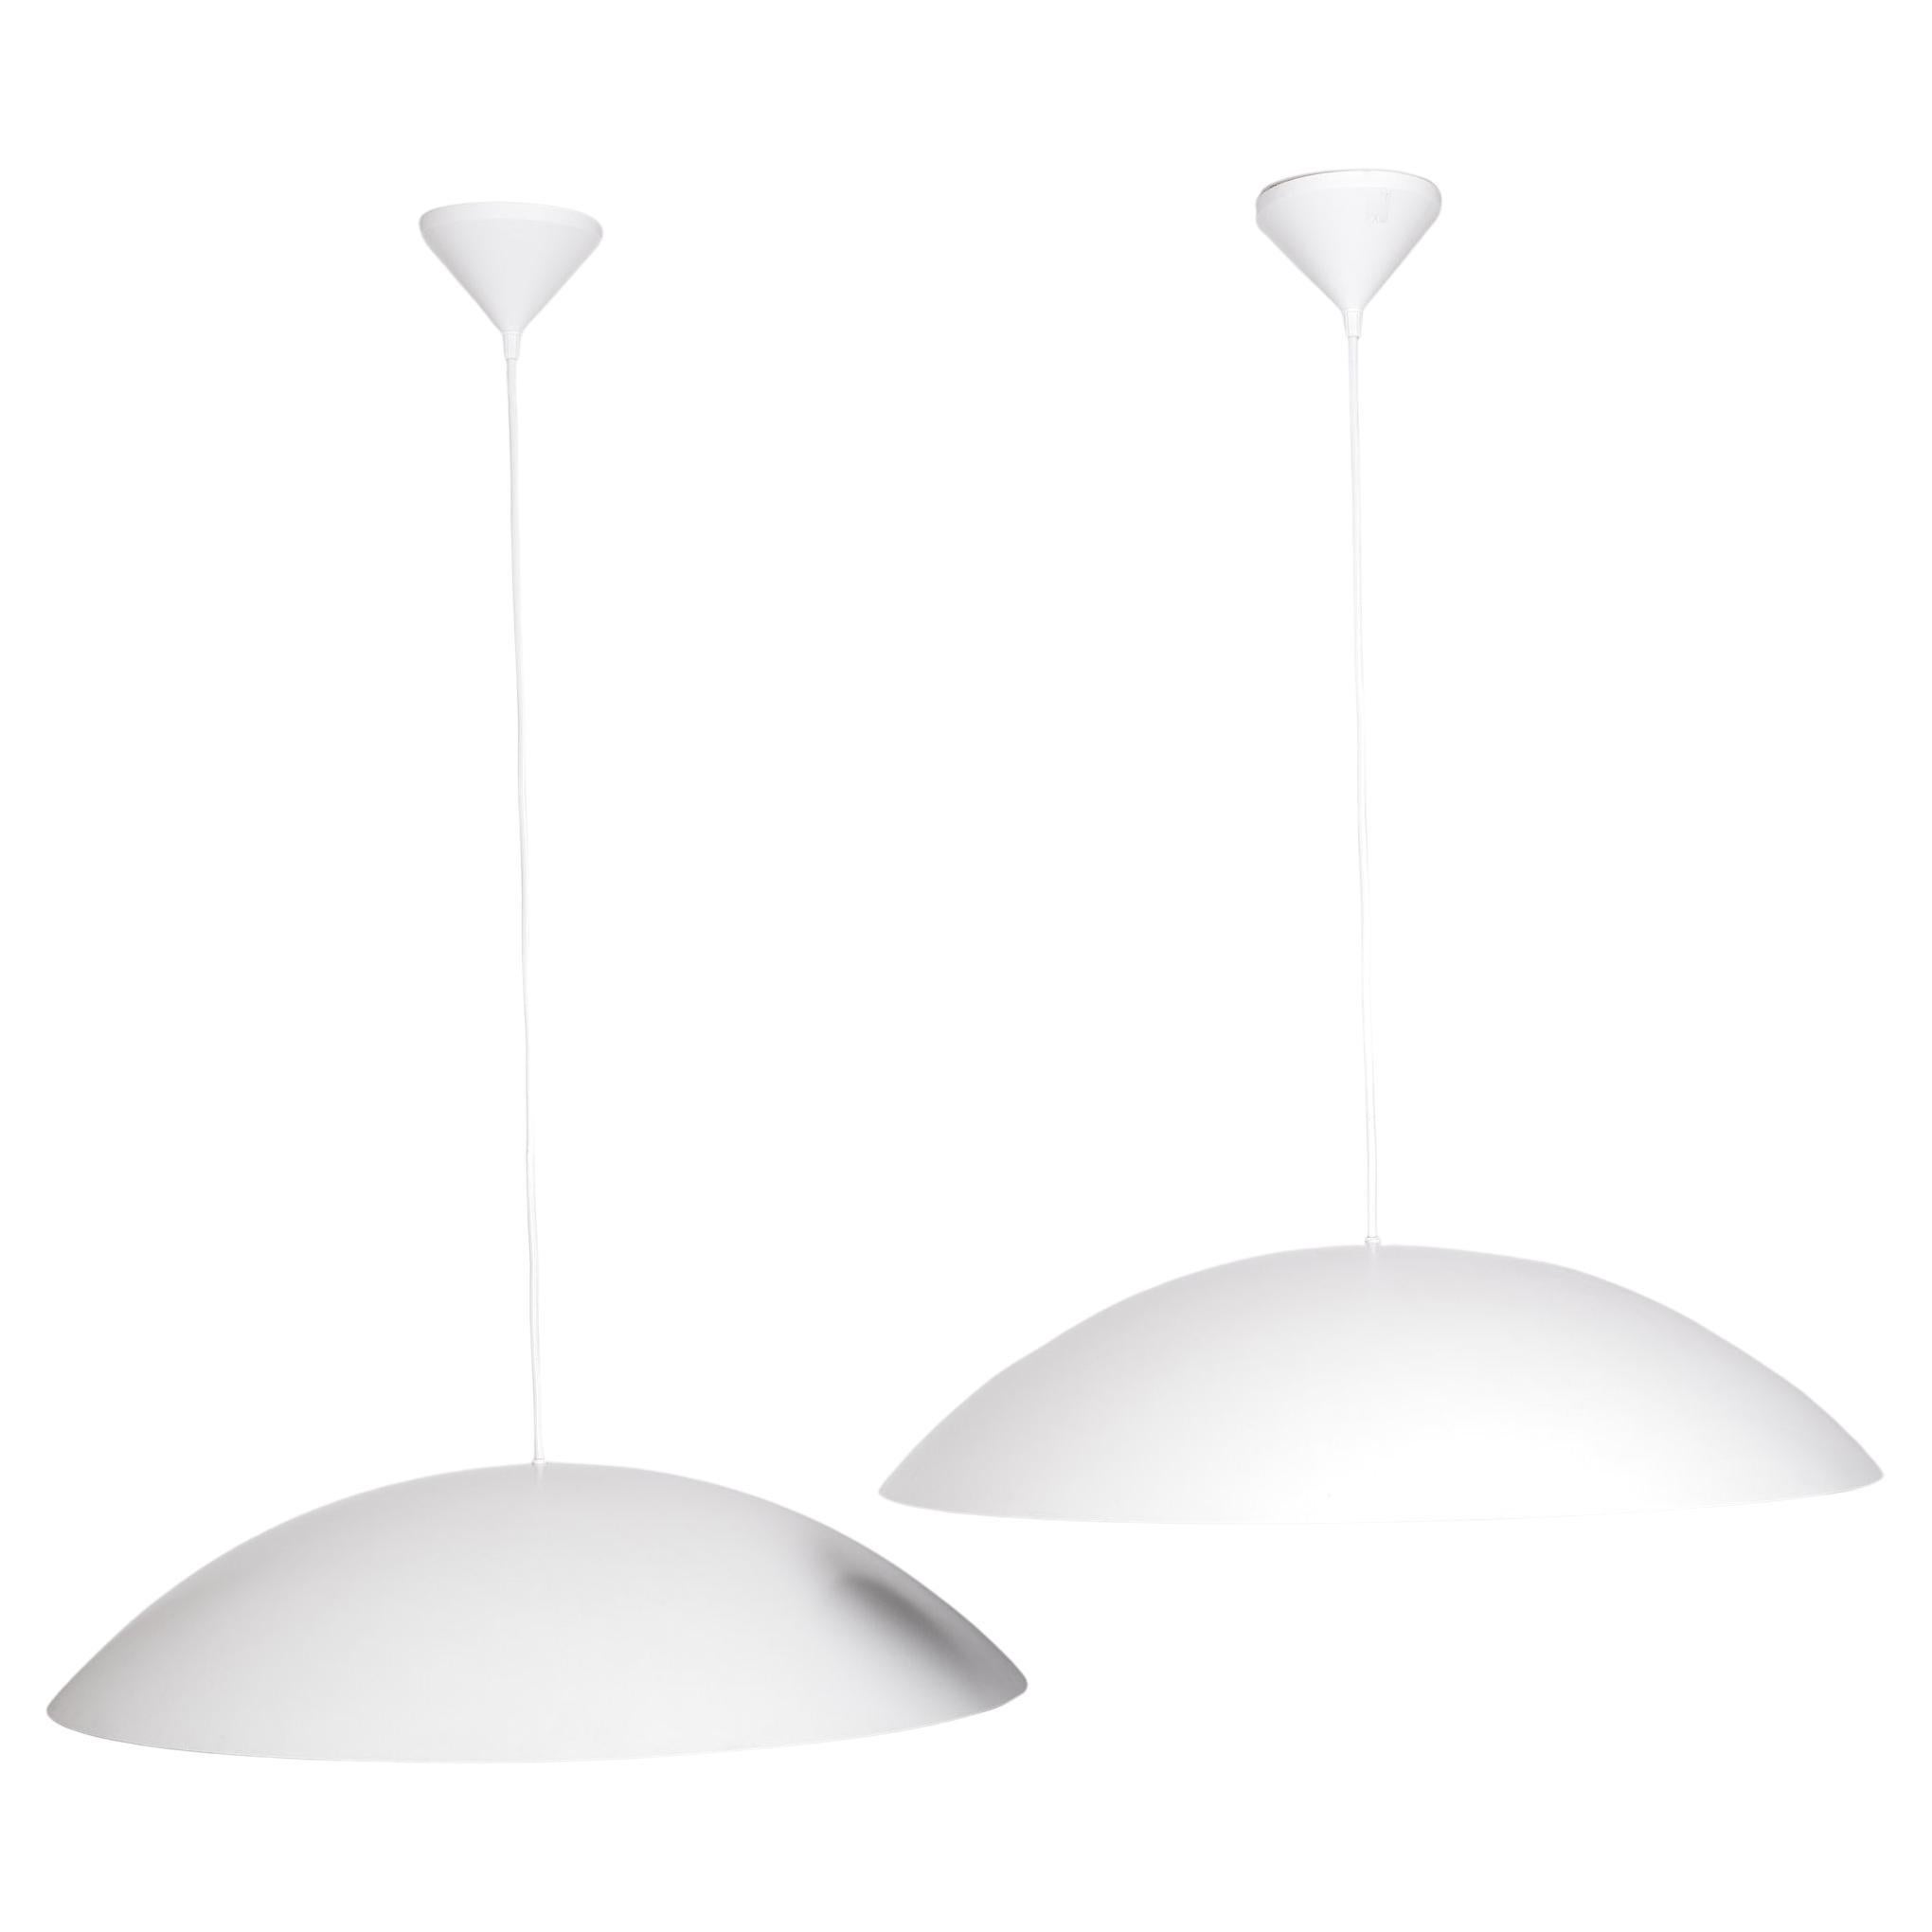 Mid-Century Modern Large Pendant Lamps Claus Bonderup and Torsten Thorup 1975 Denmark For Sale